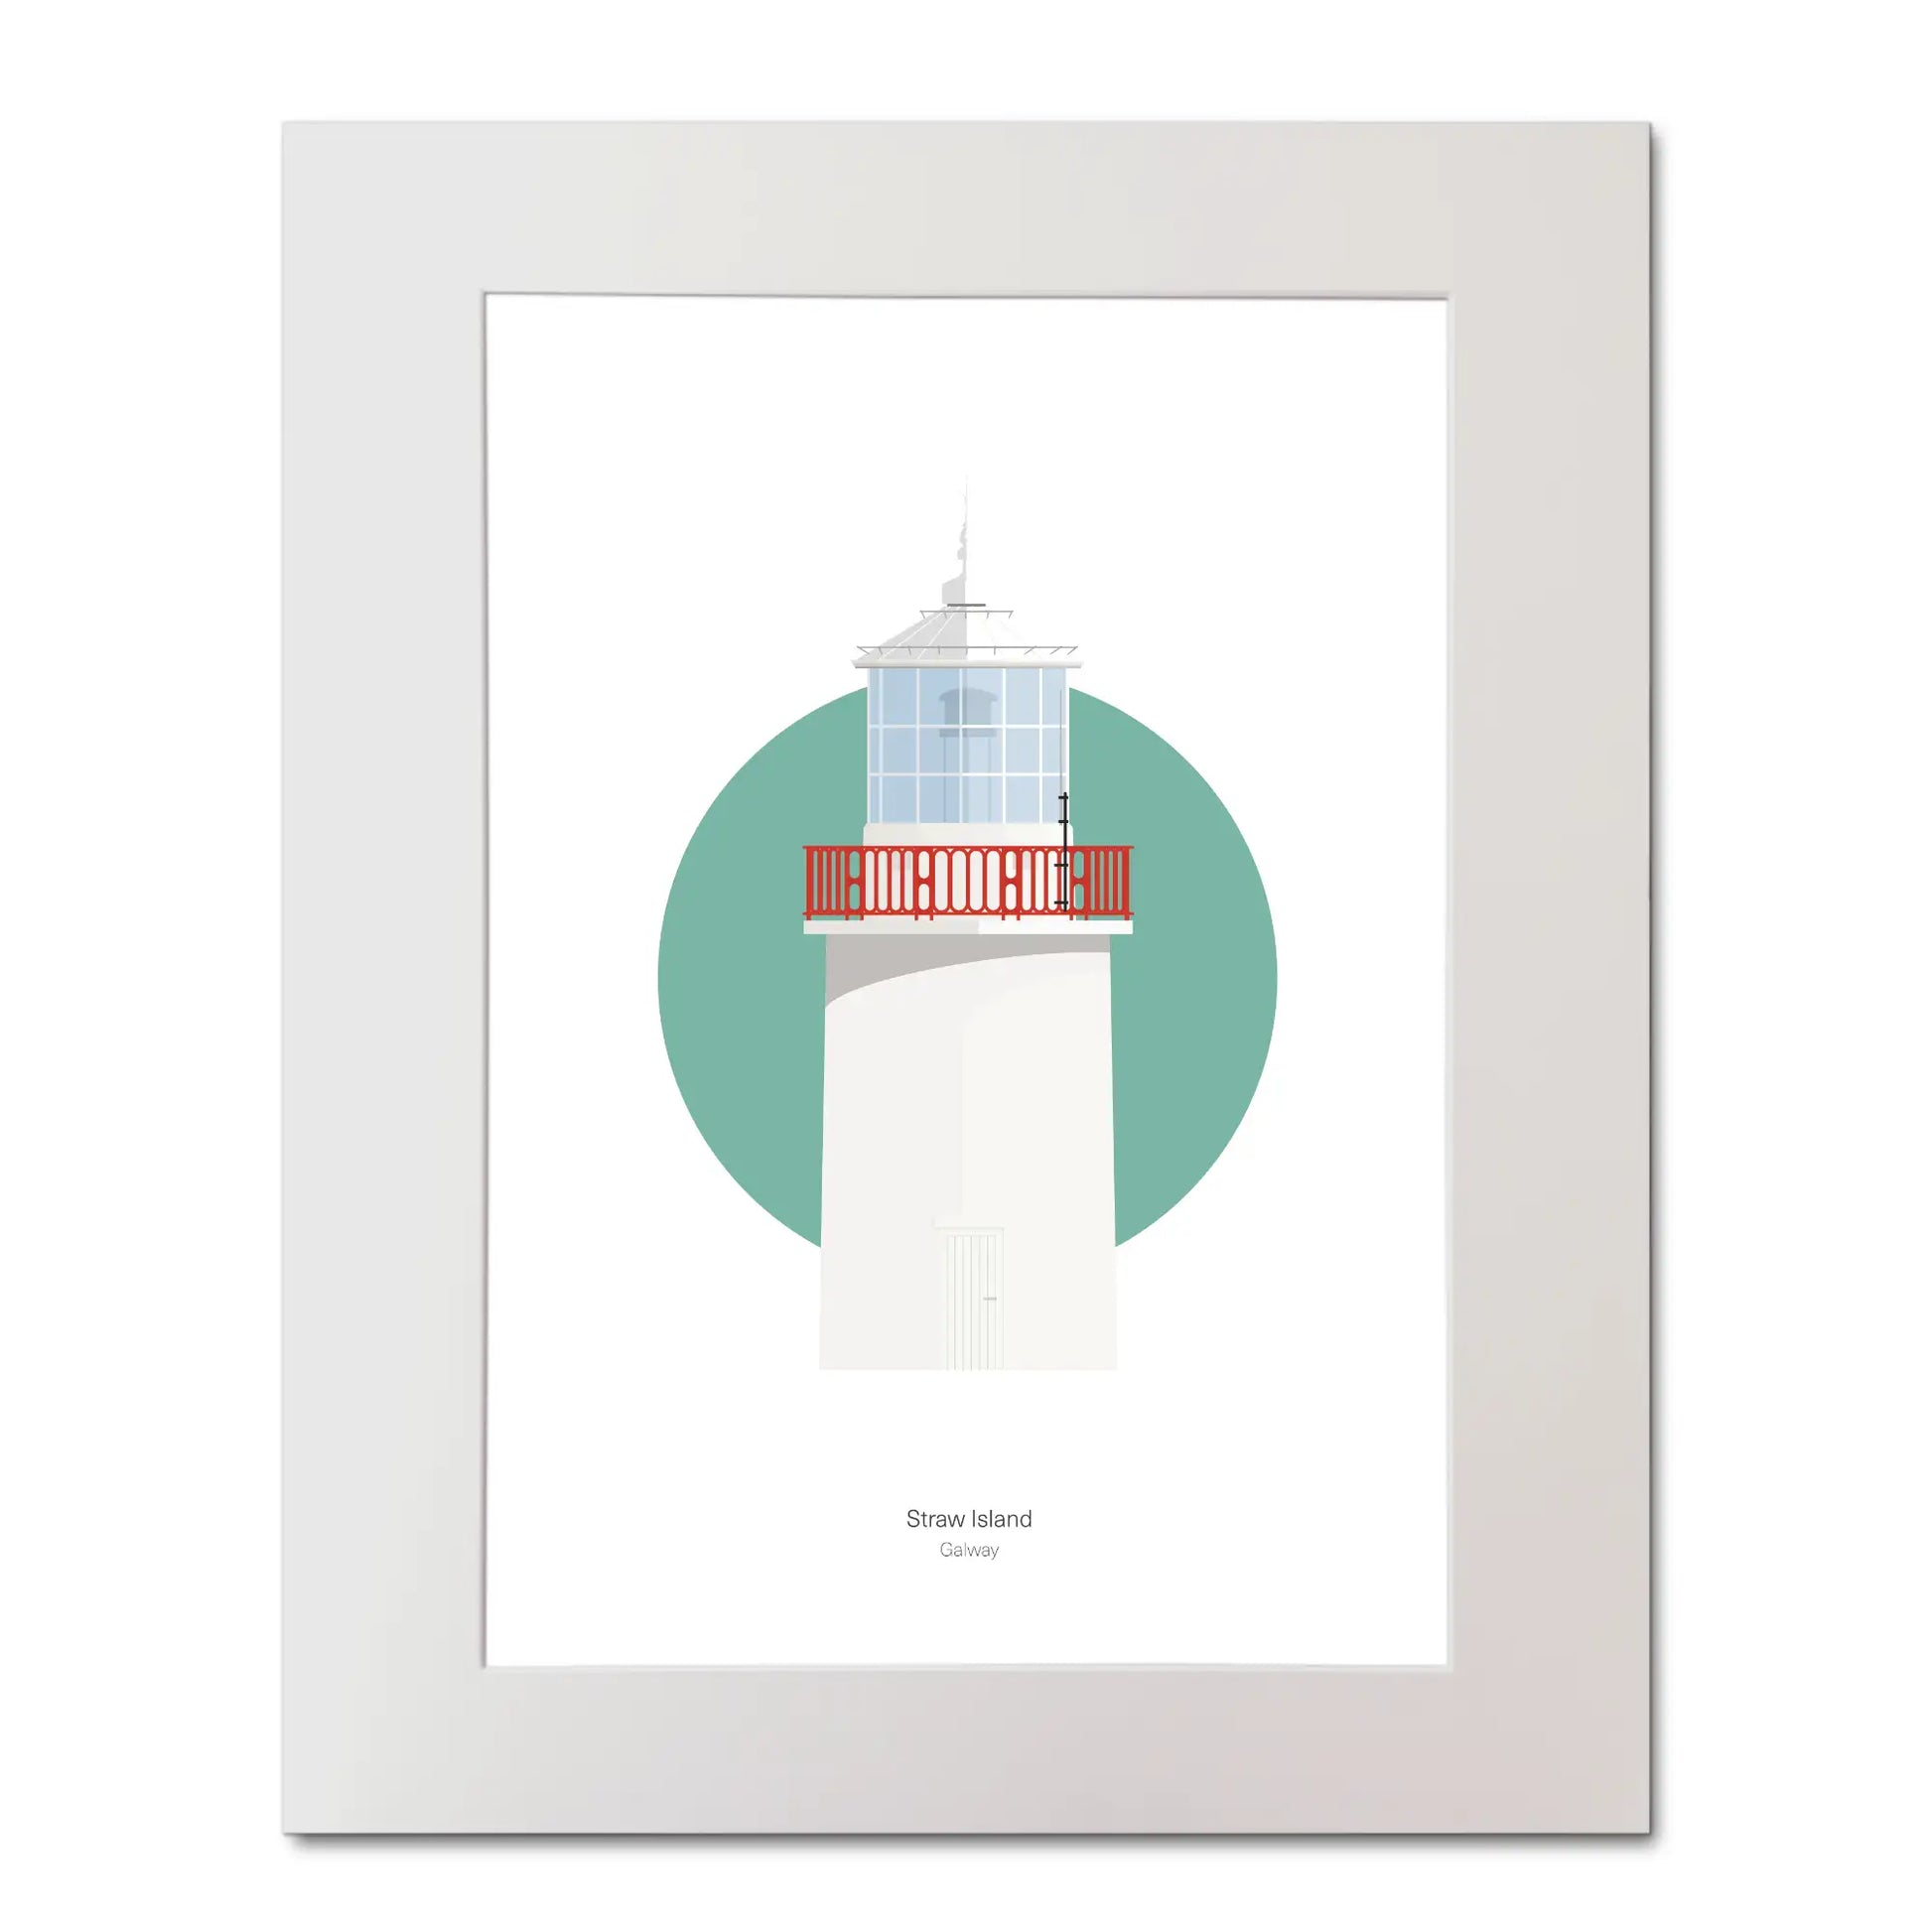 Contemporary illustration of Straw Island lighthouse on a white background inside light blue square, mounted and measuring 40x50cm.